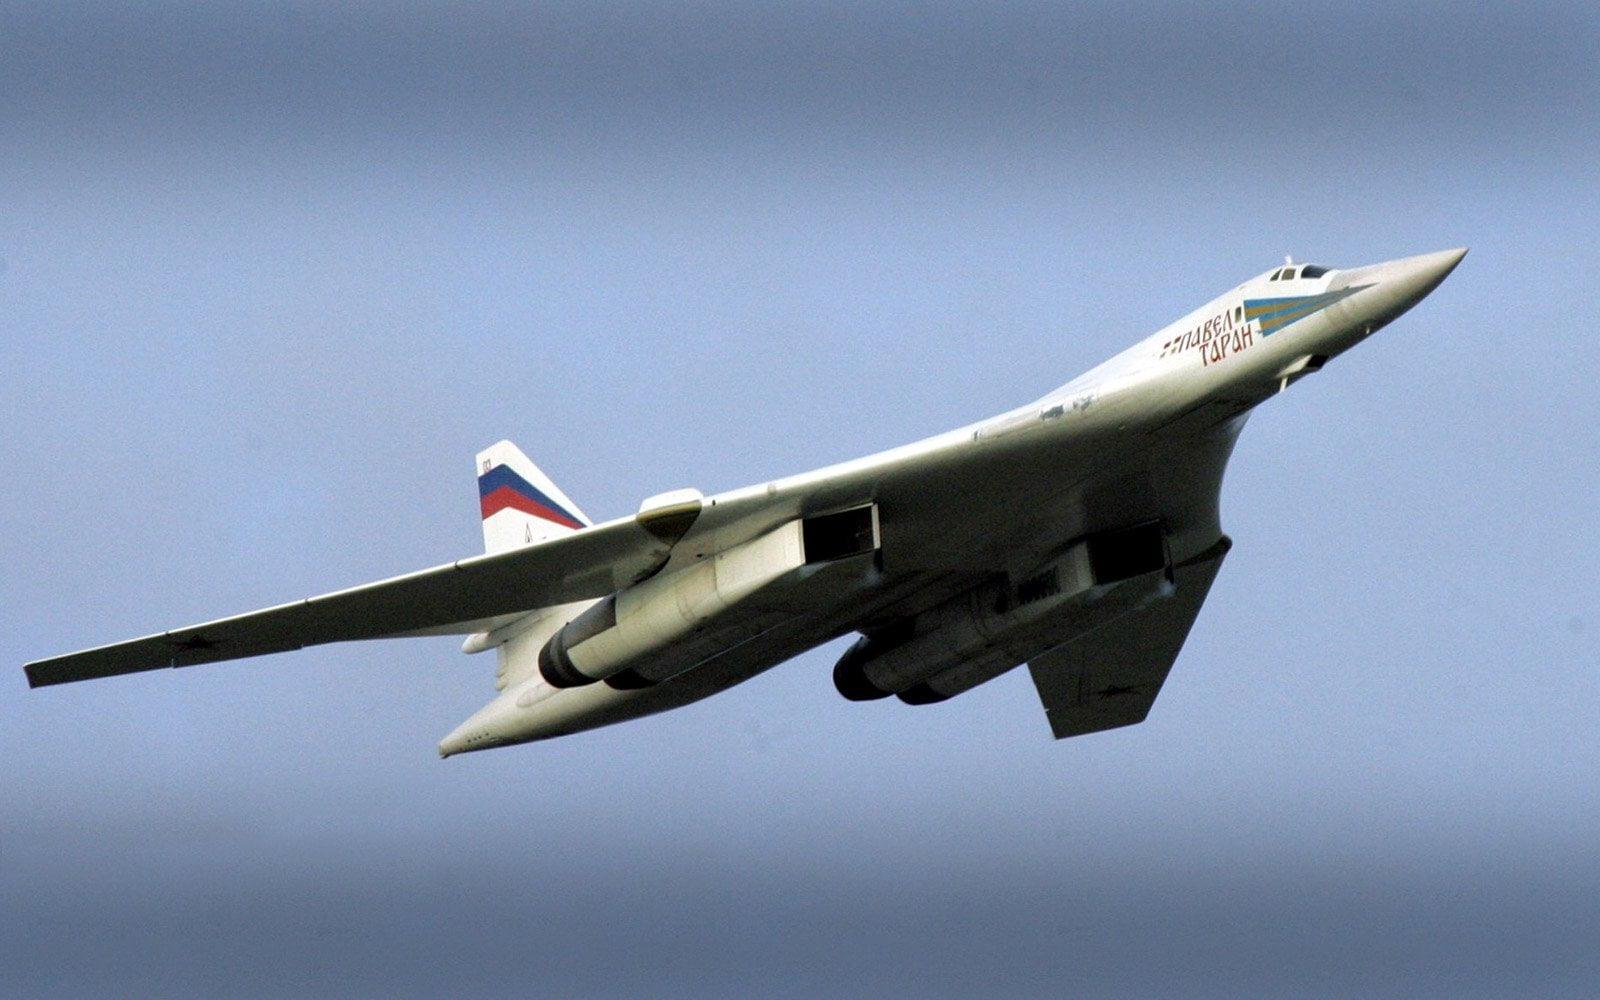 The Tupolev Tu-160 Is An Expert In Air Combat